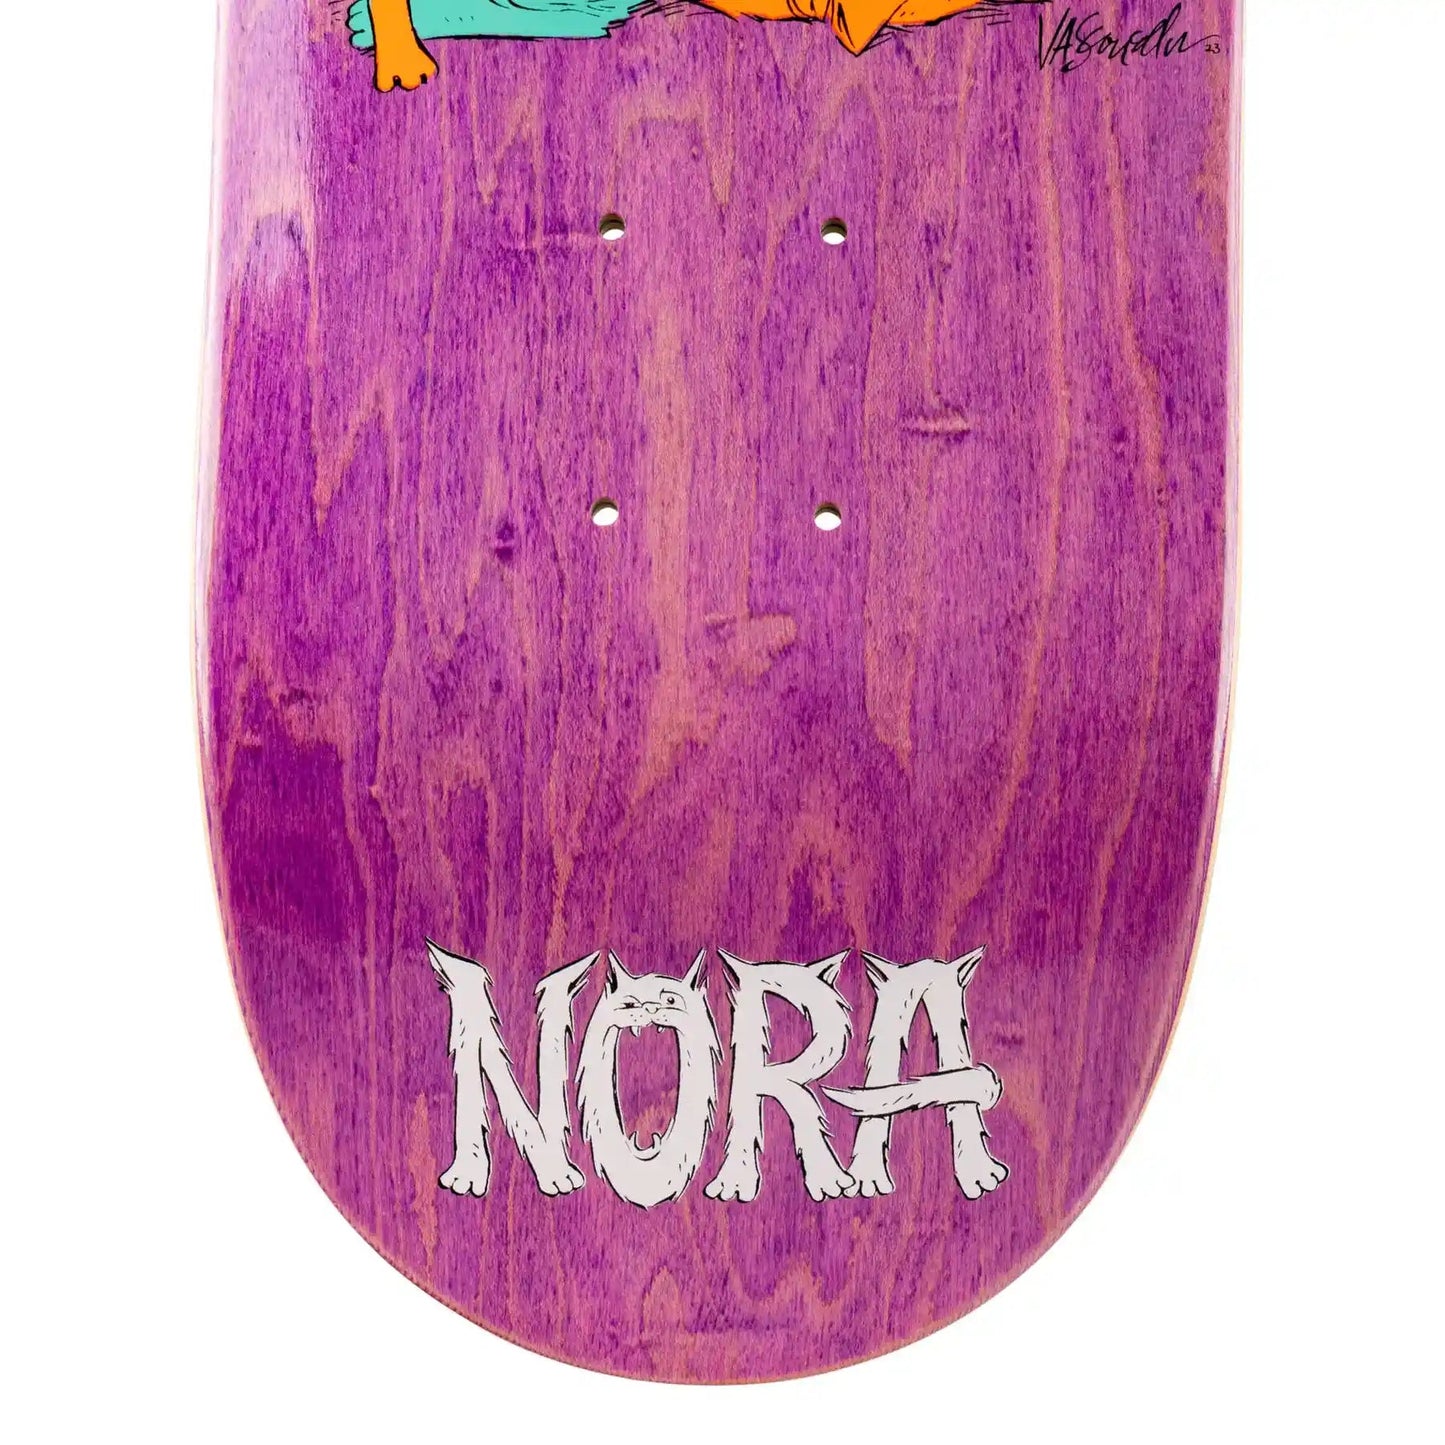 Welcome Purr Pile Nora Pro Model Deck (7.75"), purple stain - Tiki Room Skateboards - 5